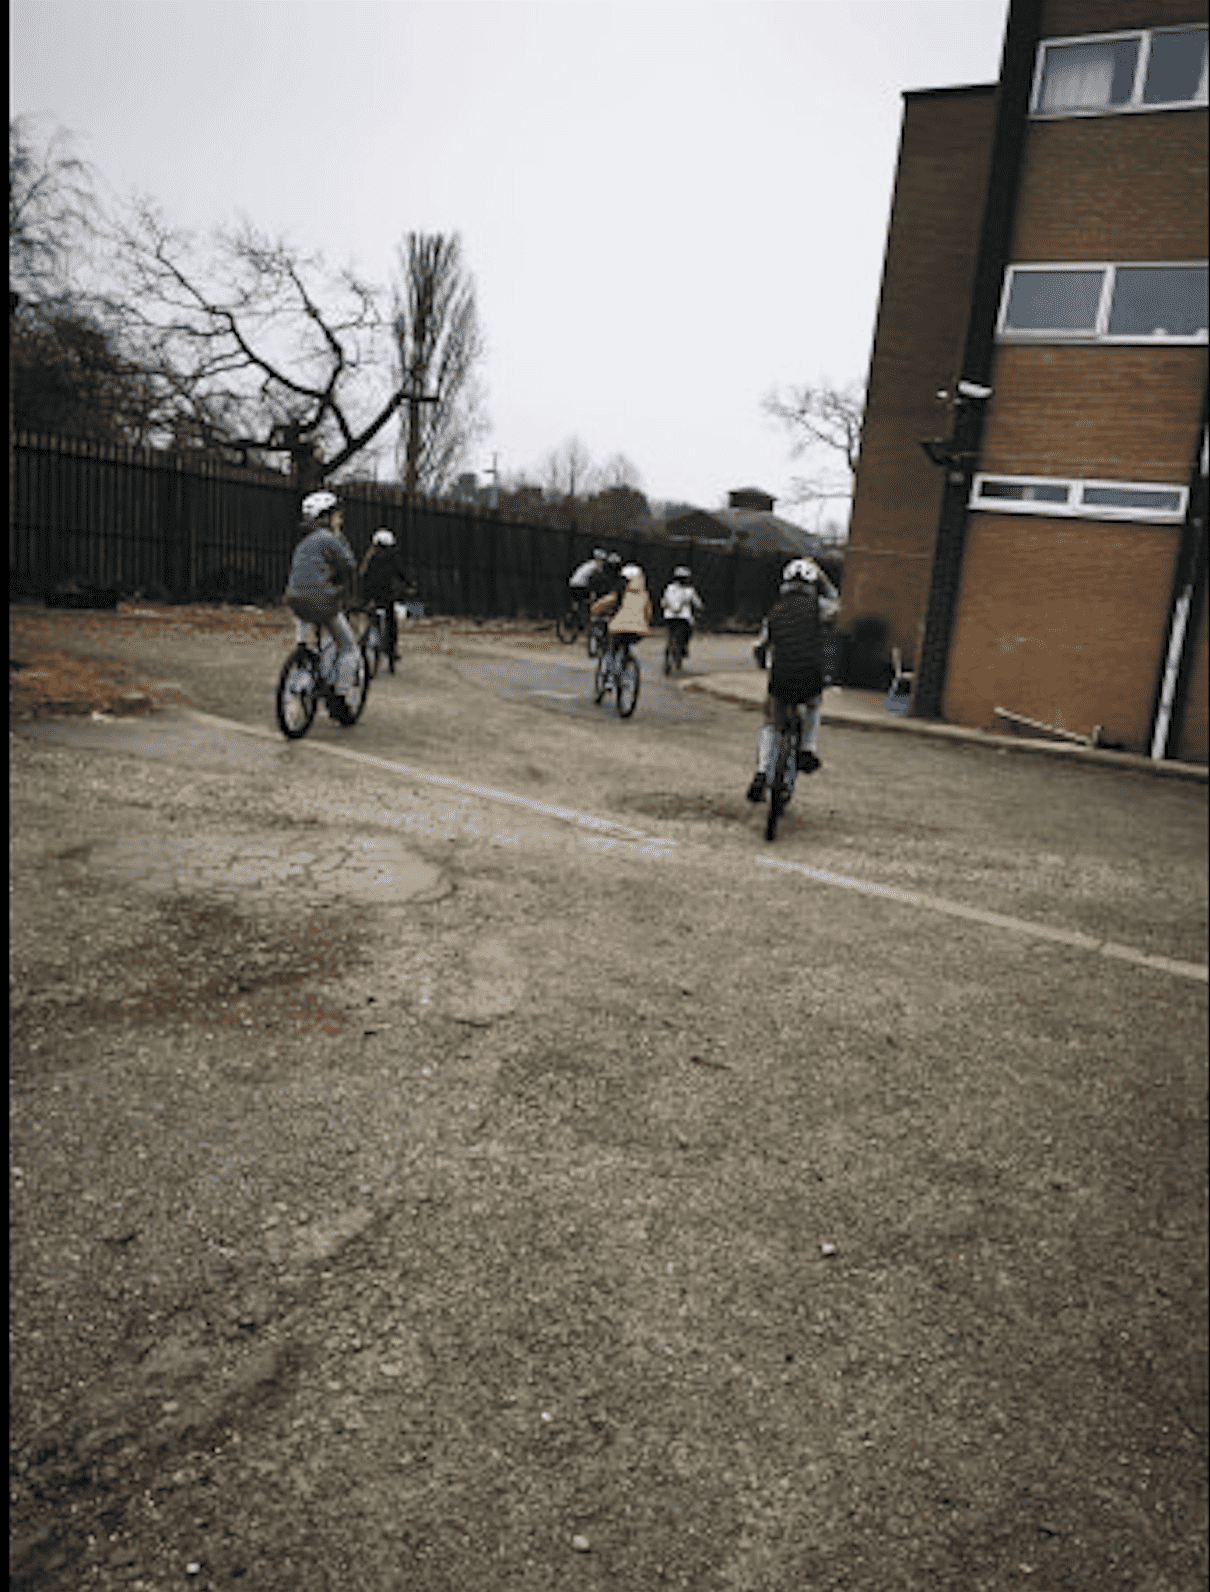 4 young people on bikes riding around a housing estate